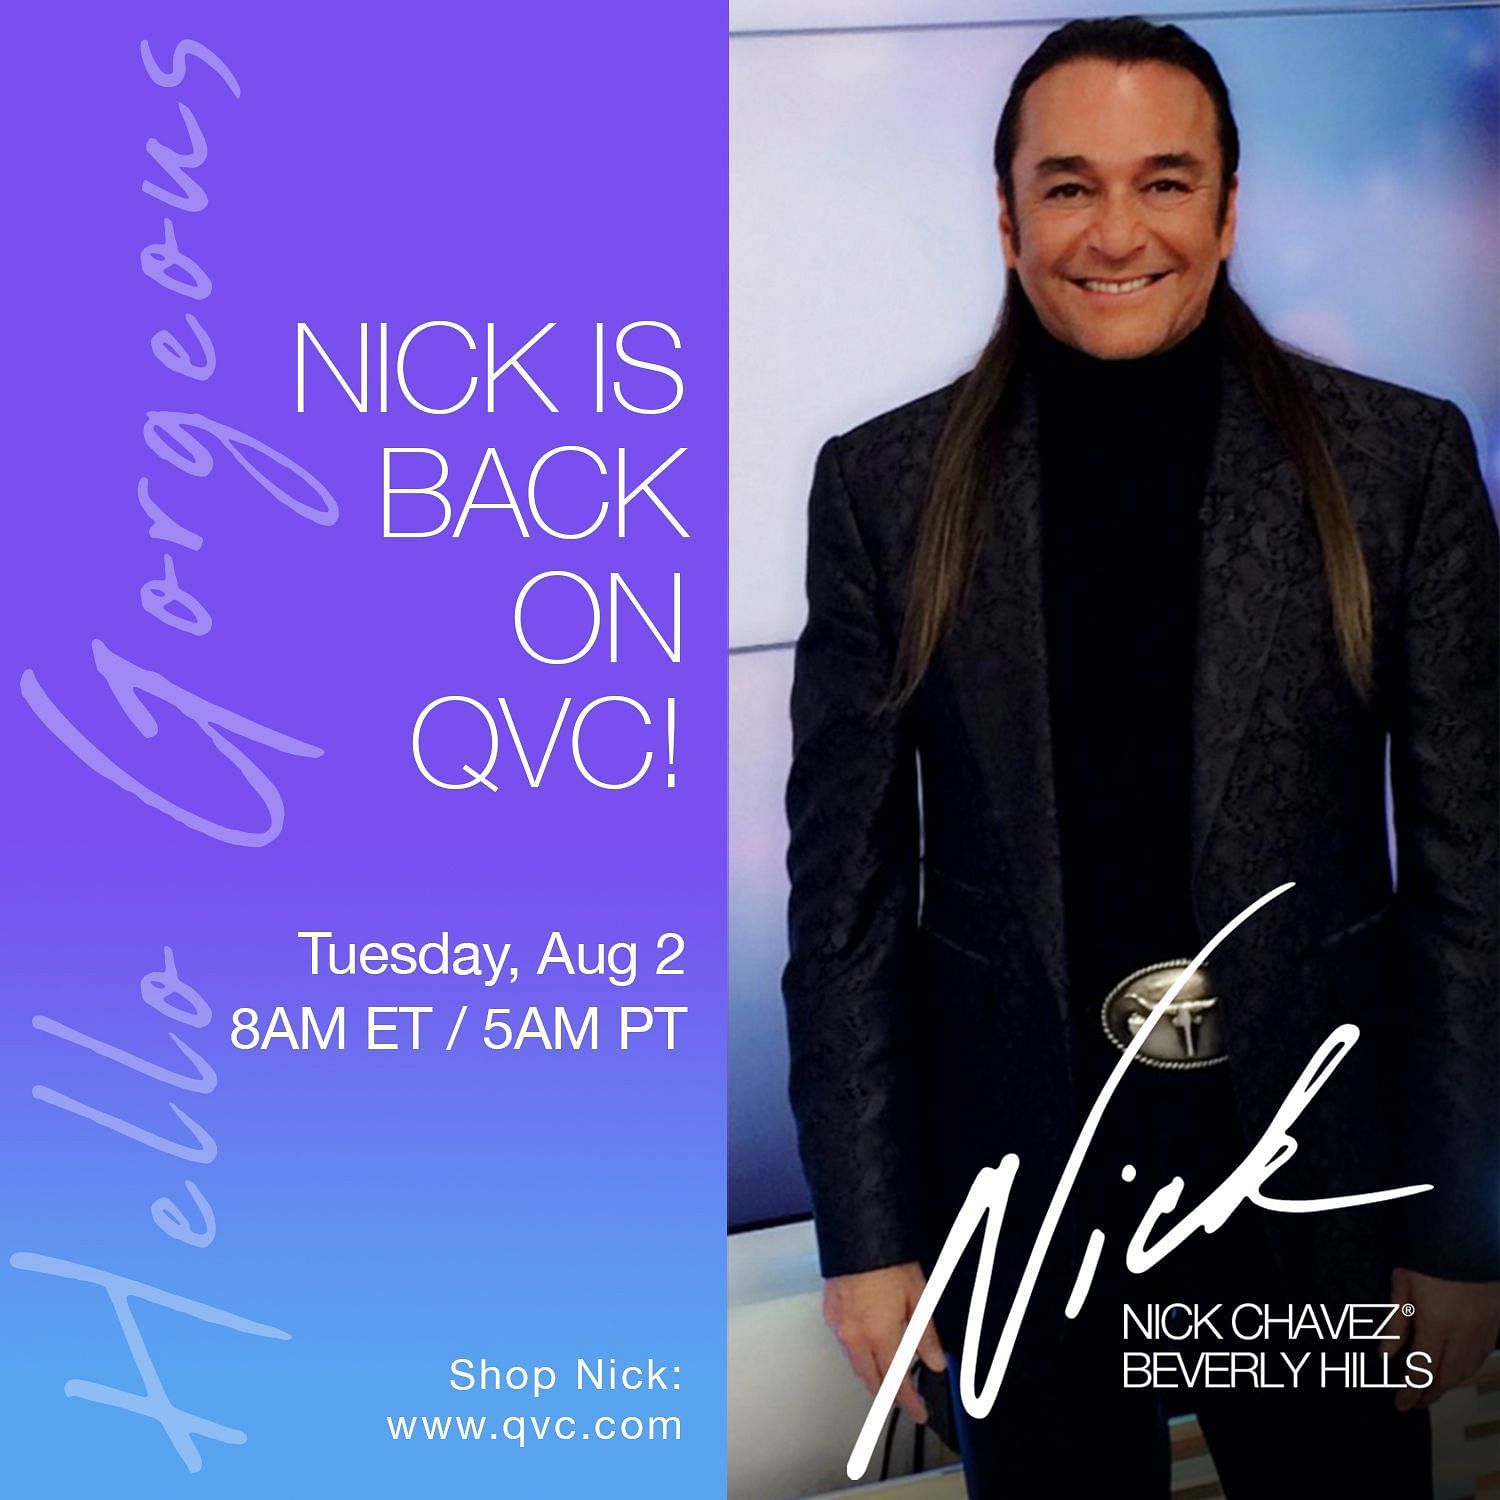 Image showing promotion for Nick's QVC appearance (Image via Twitter/@NickChavezBH)